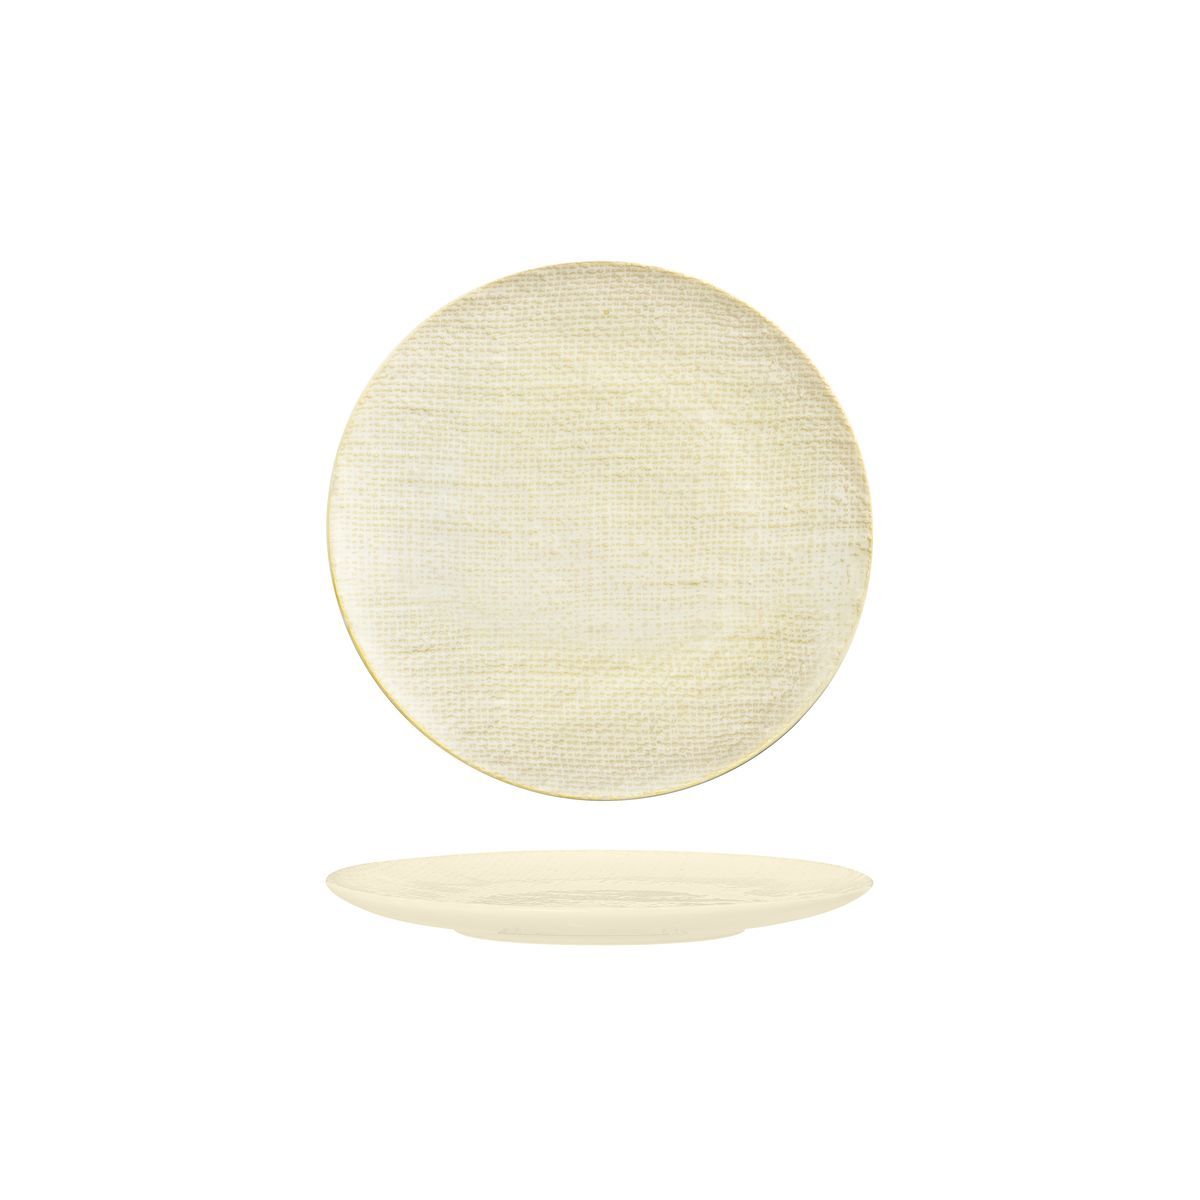 ROUND PLATE - FLAT, 180mm , REACTIVE WHITE from Luzerne. Textured, made out of Ceramic and sold in boxes of 6. Hospitality quality at wholesale price with The Flying Fork! 